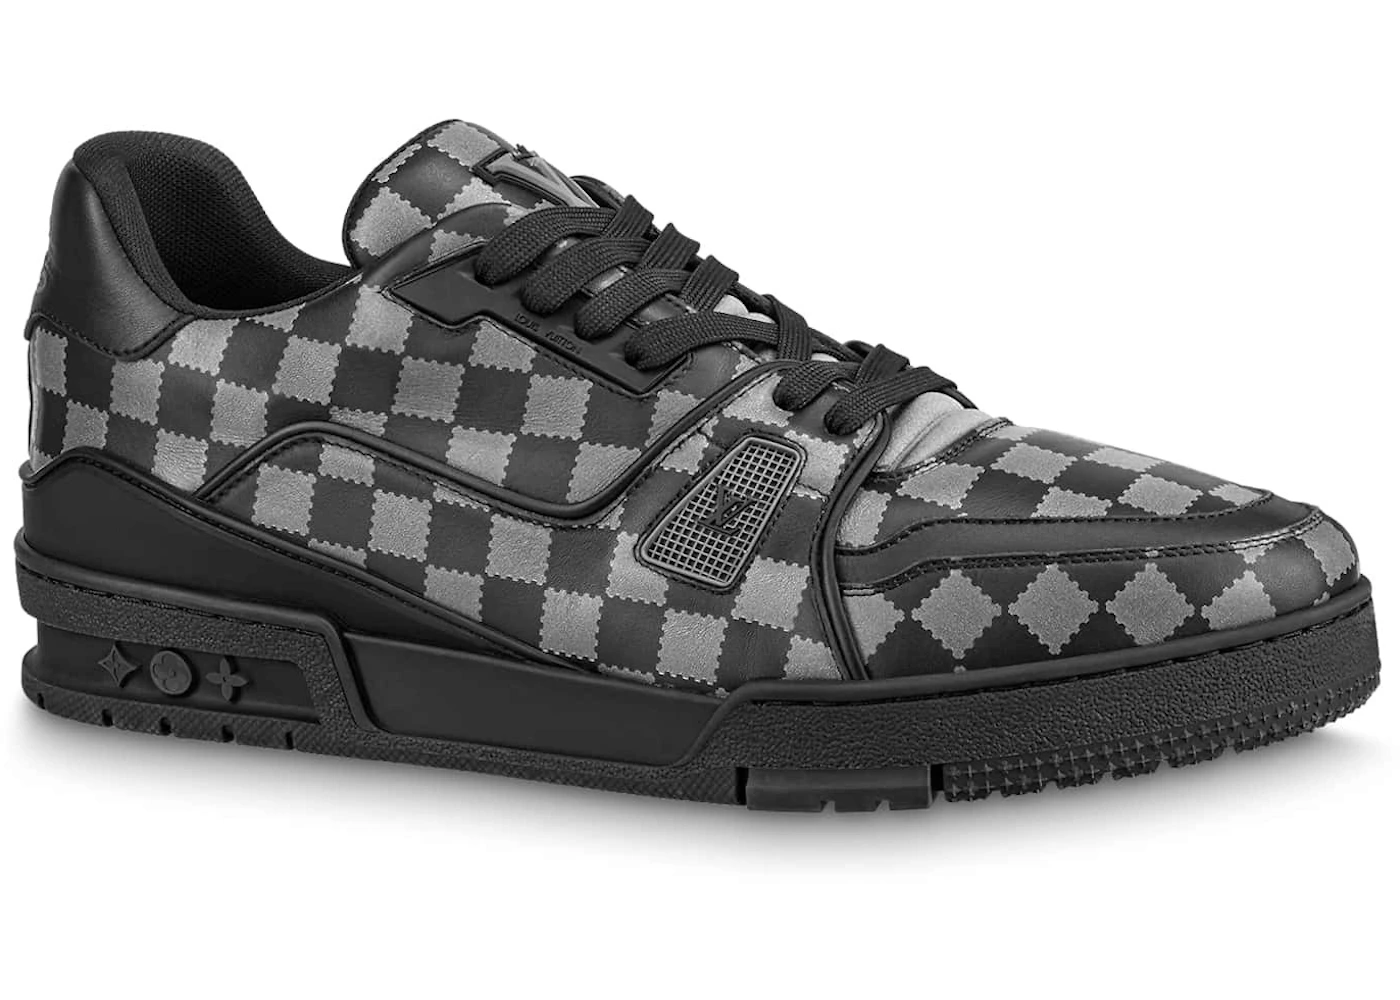 Louis Vuitton LV trainer Damier brand new size 6 with receipt rare